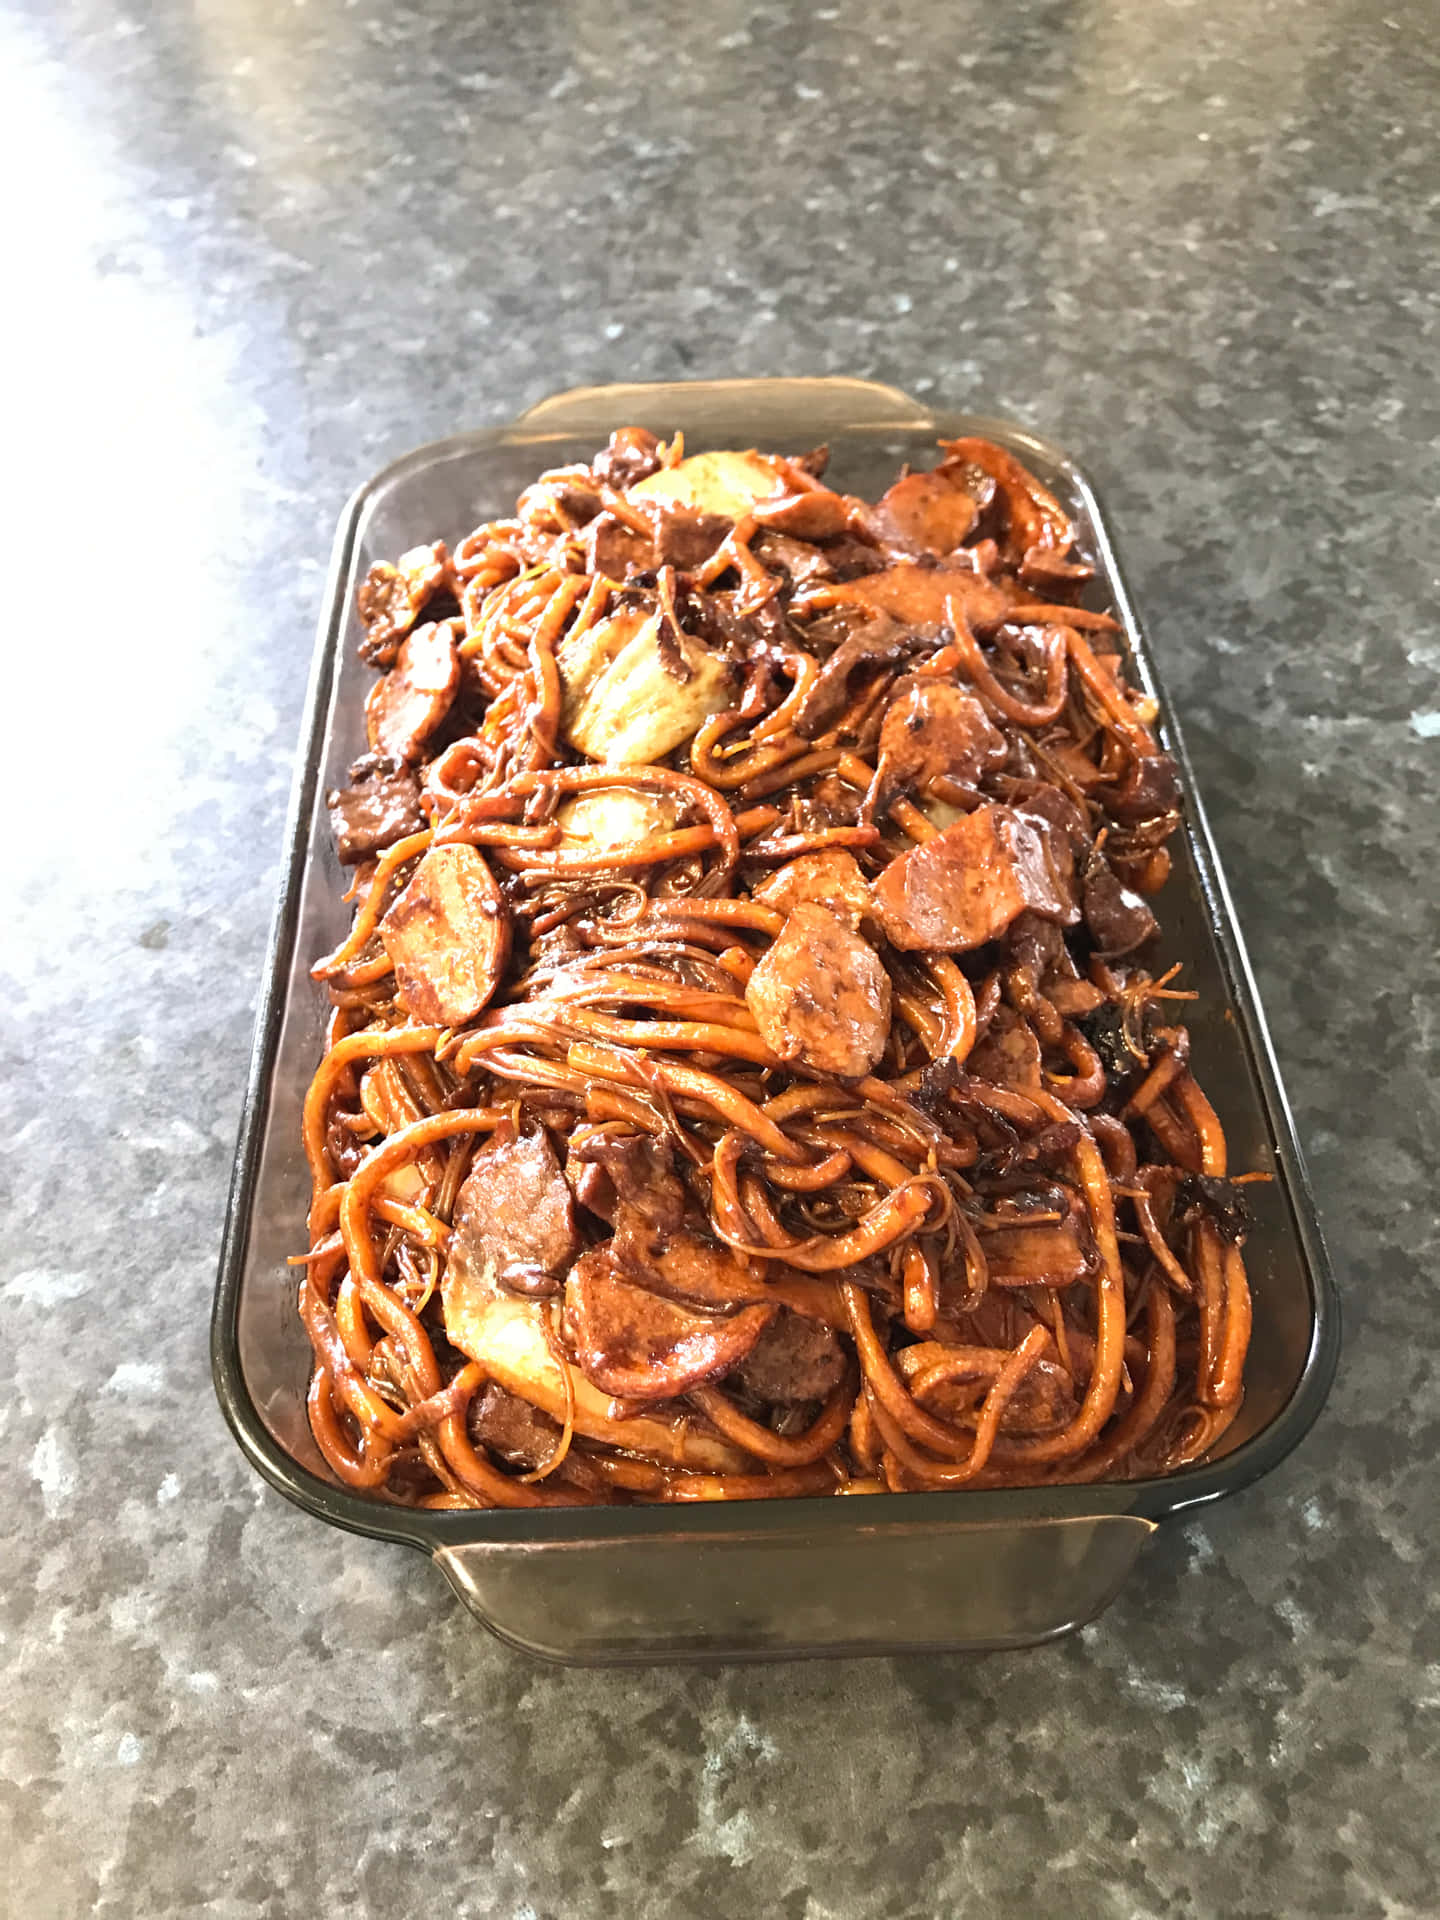 Hokkien Mee On Transparent Container Picture